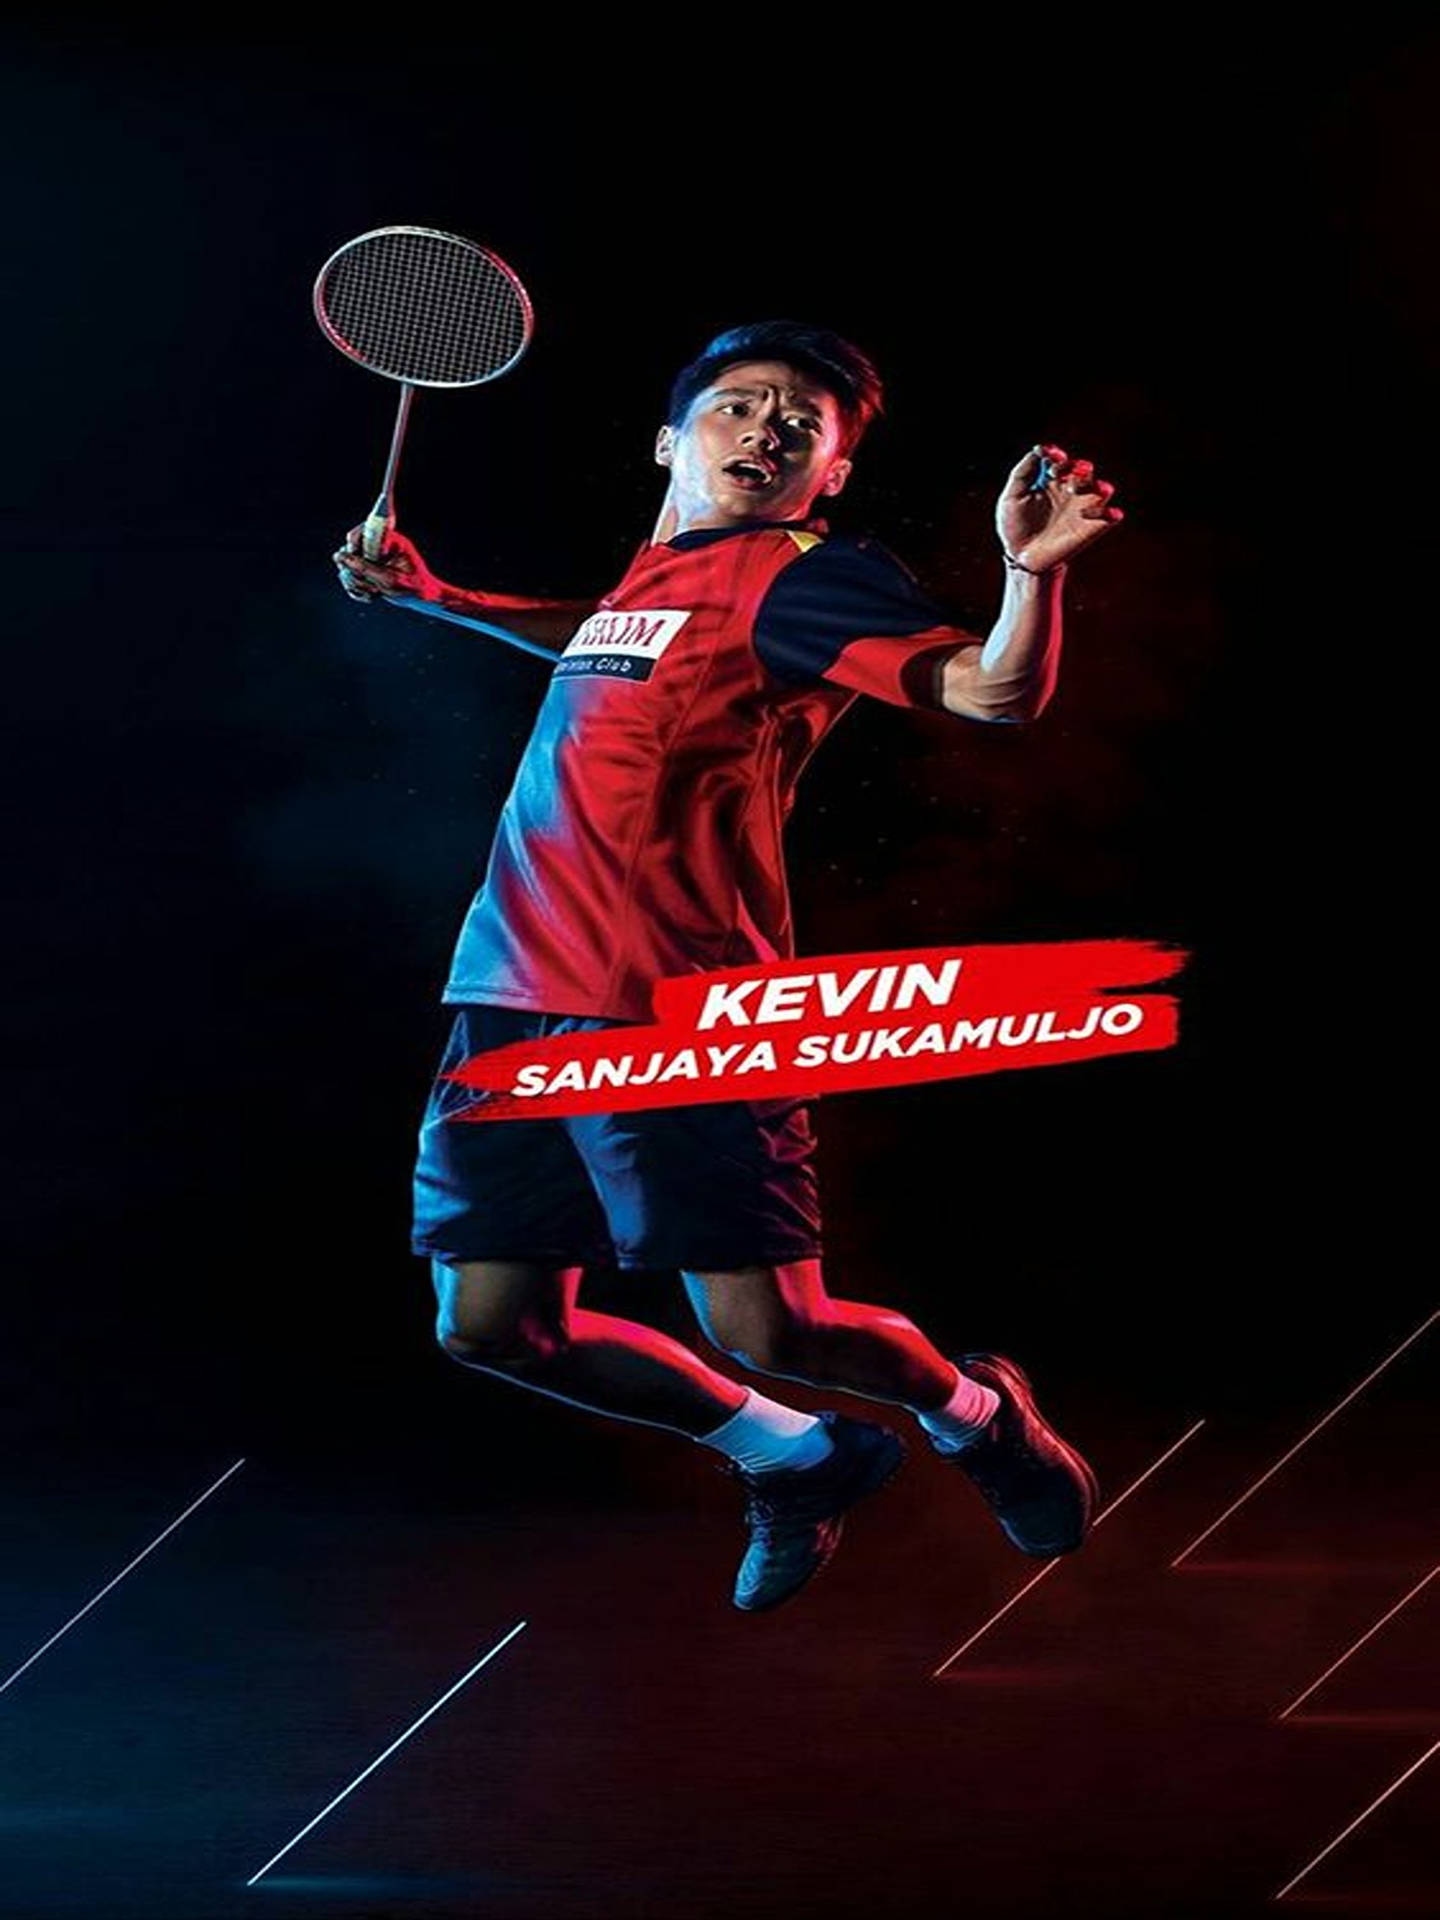 Energetic Action from Kevin Sanjaya in a High Tense Badminton Match Wallpaper